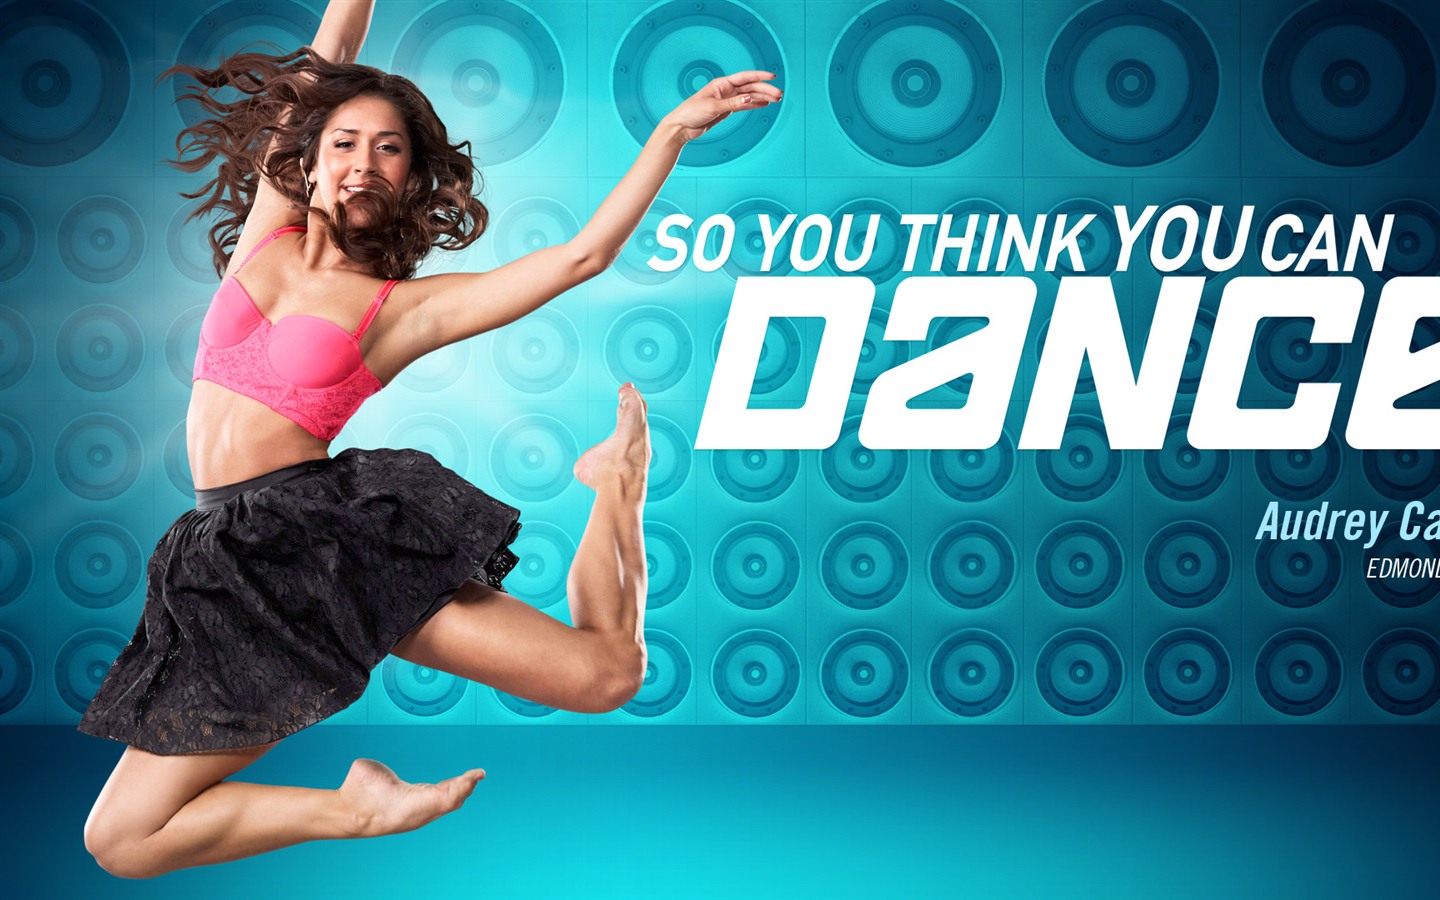 So You Think You Can Dance 舞林争霸 2012高清壁纸5 - 1440x900